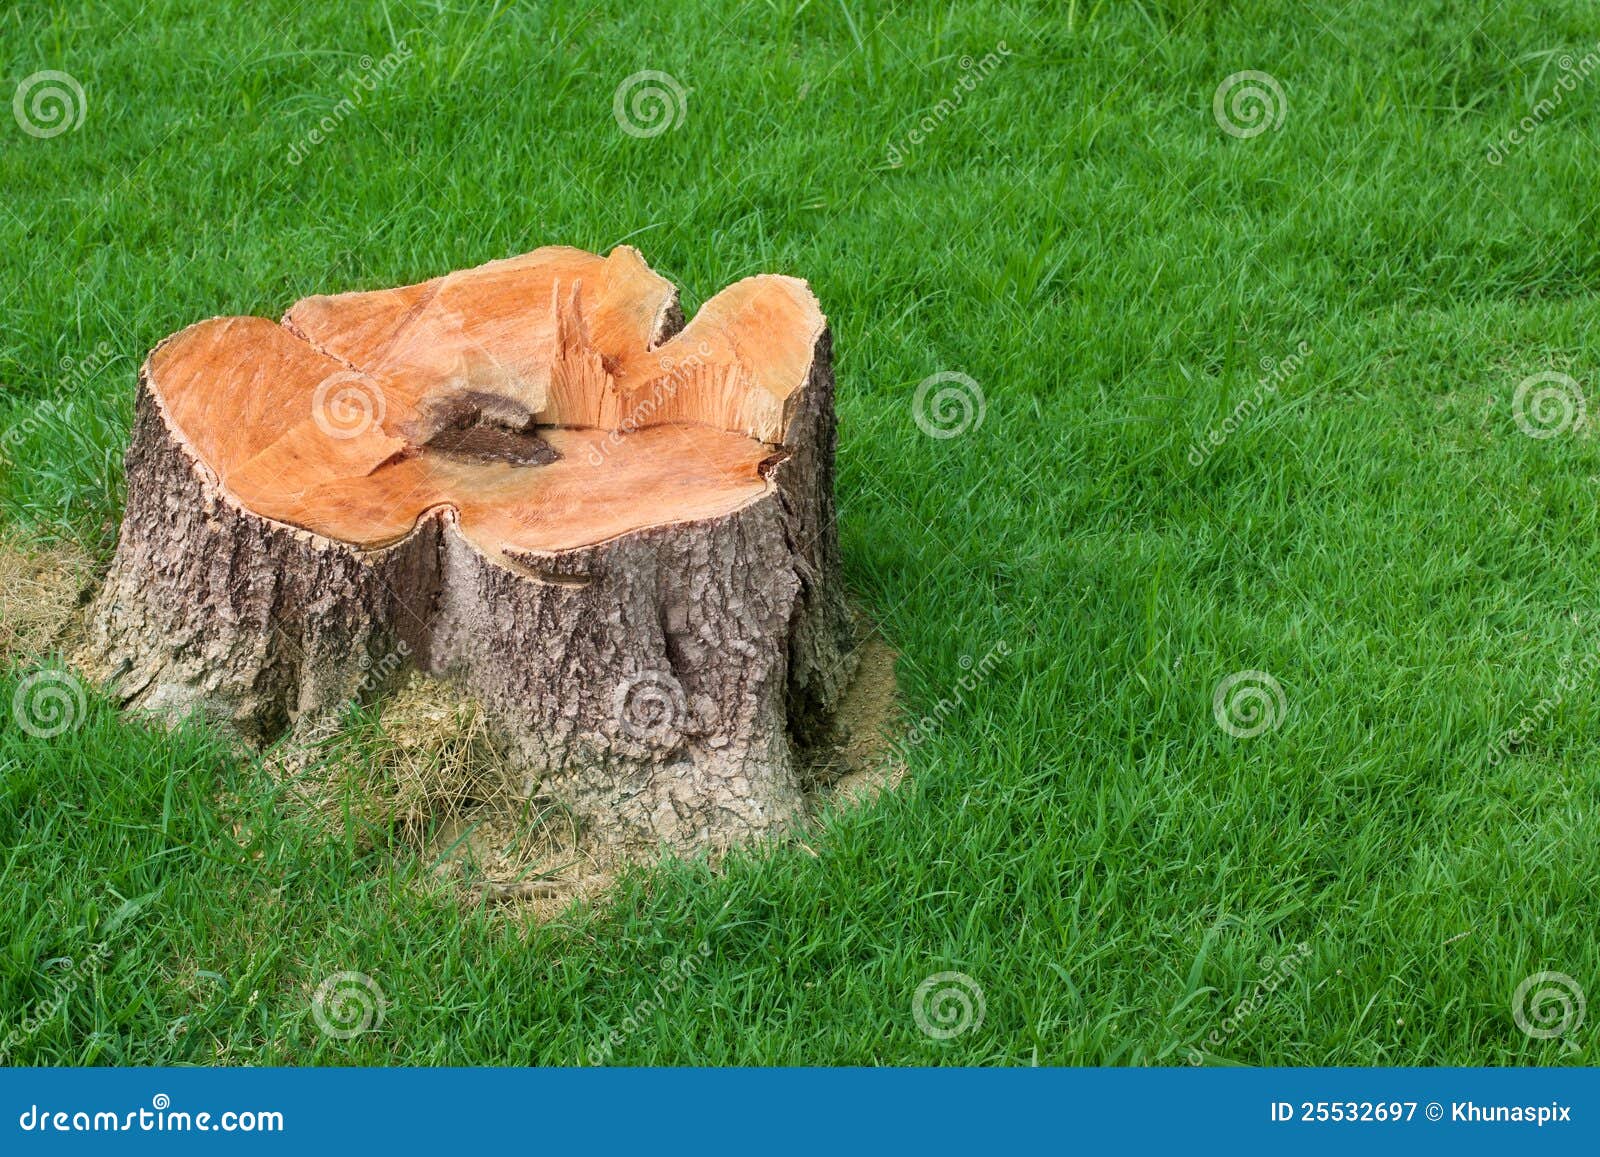 tree stump and green grass field manage